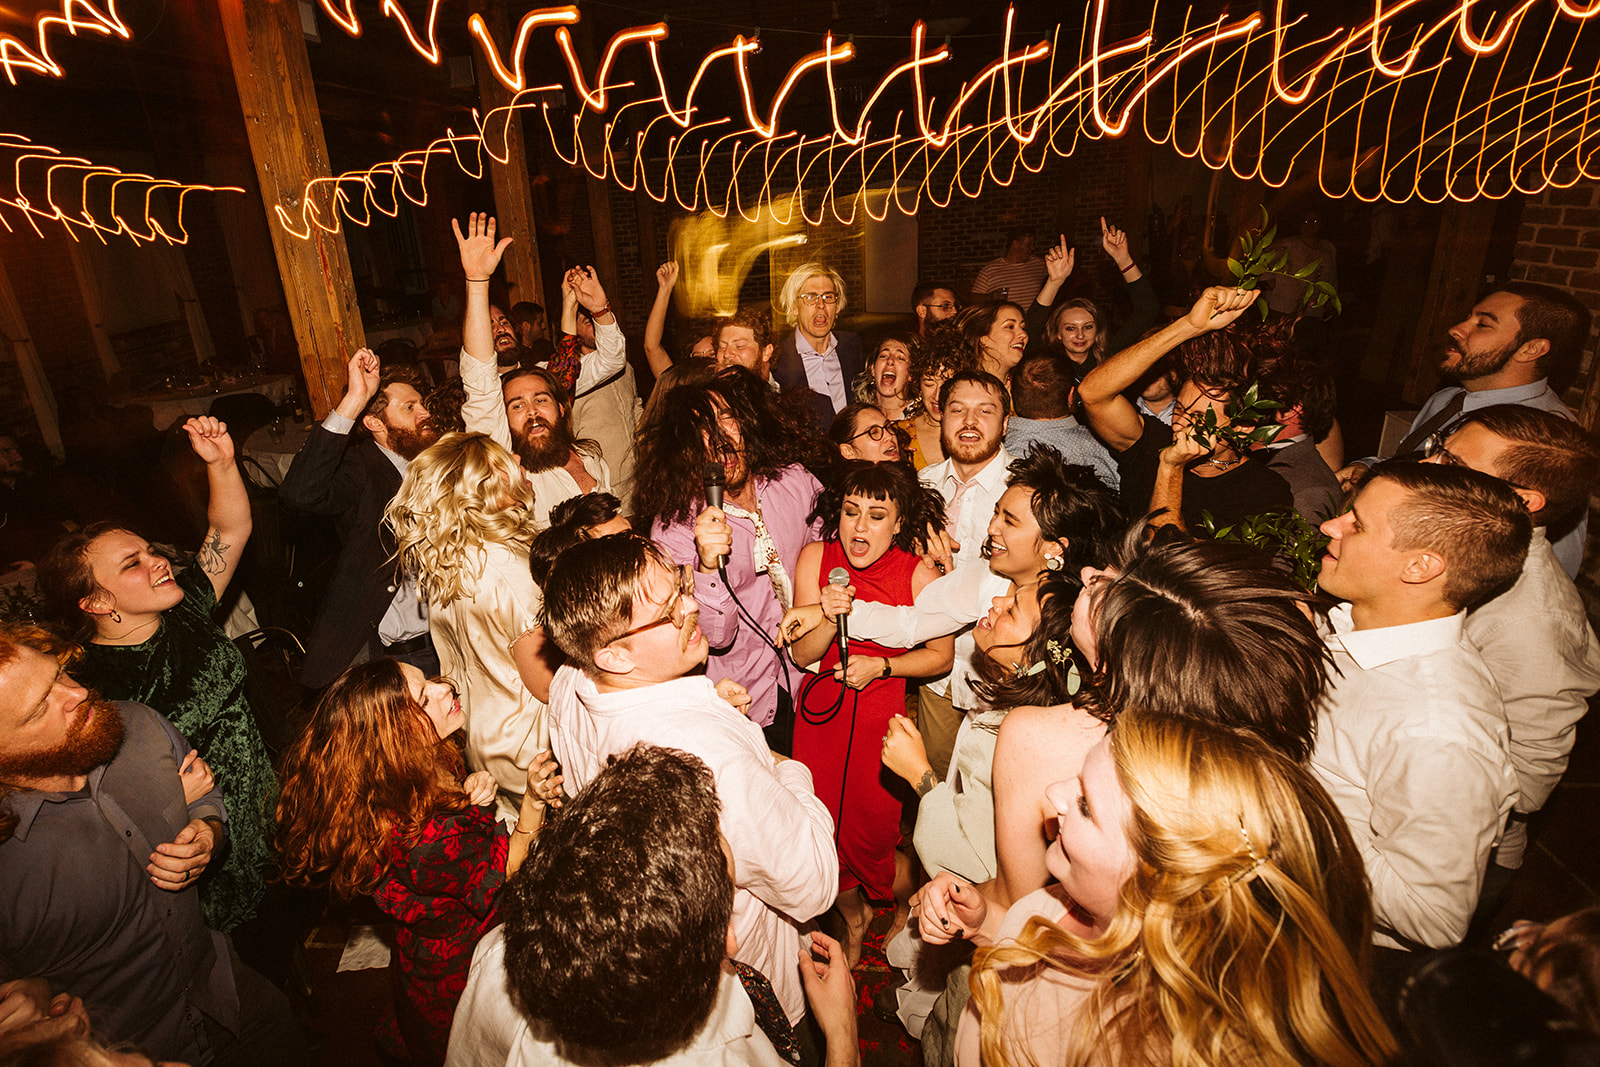 Wedding guests dance and sing into microphones under blurry lights.